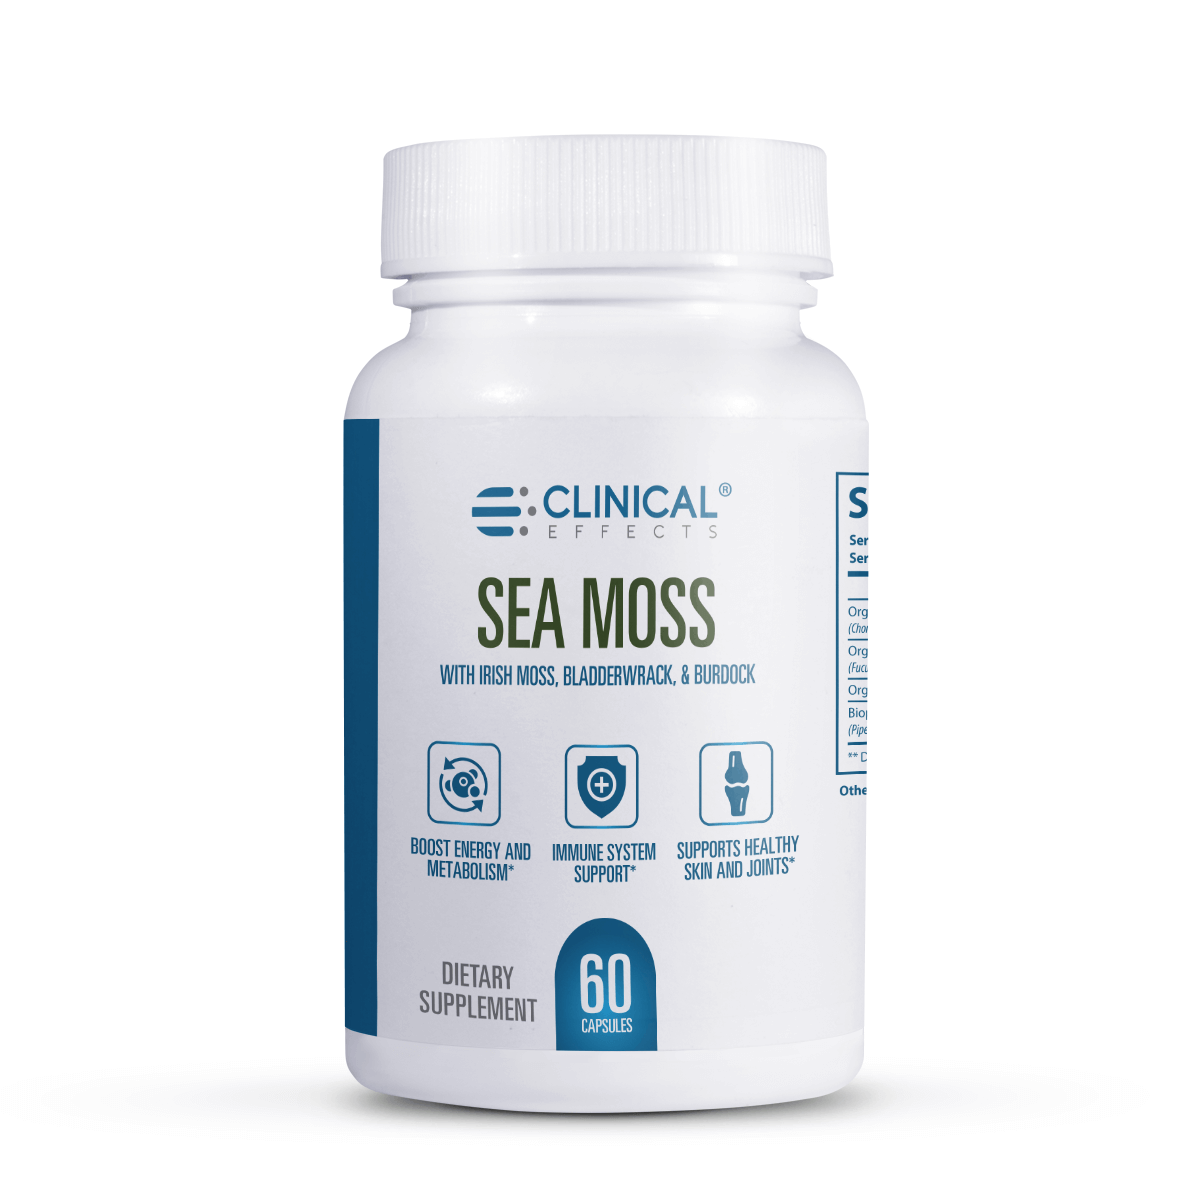 Picture of Herbal, Plant, Astragalus, Bottle with text CLINICAL® S EFFECTS Ser SEA MOSS Org (Cho WIT...